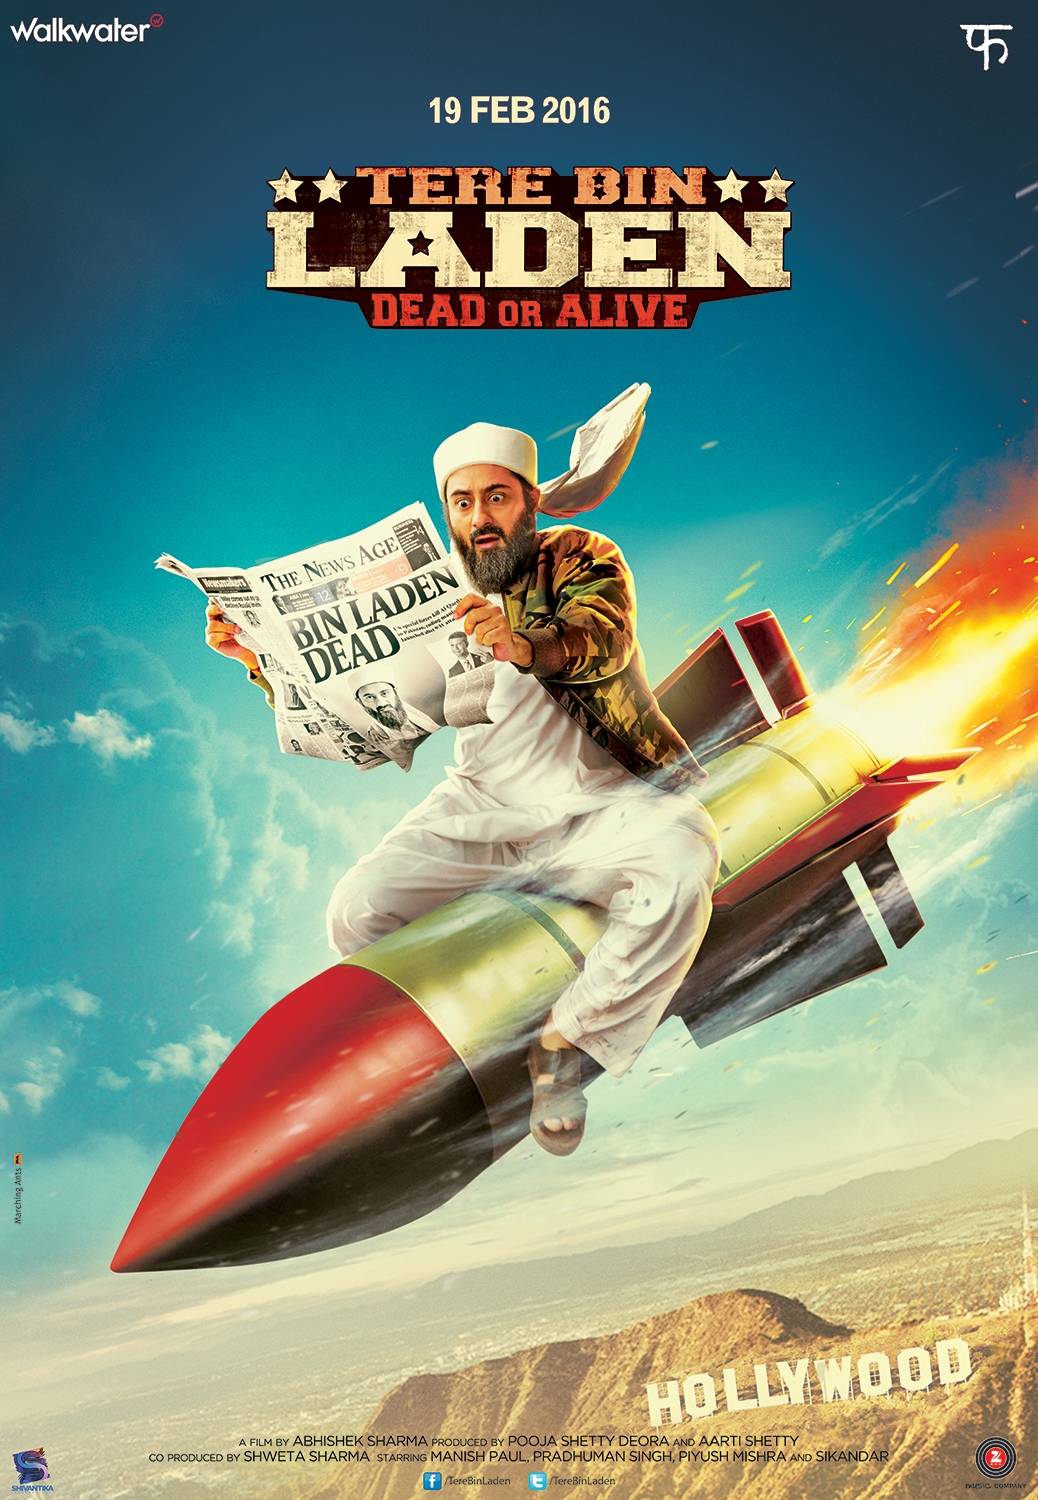 tere bin laden dead or alive trailer is out and it s hilarious